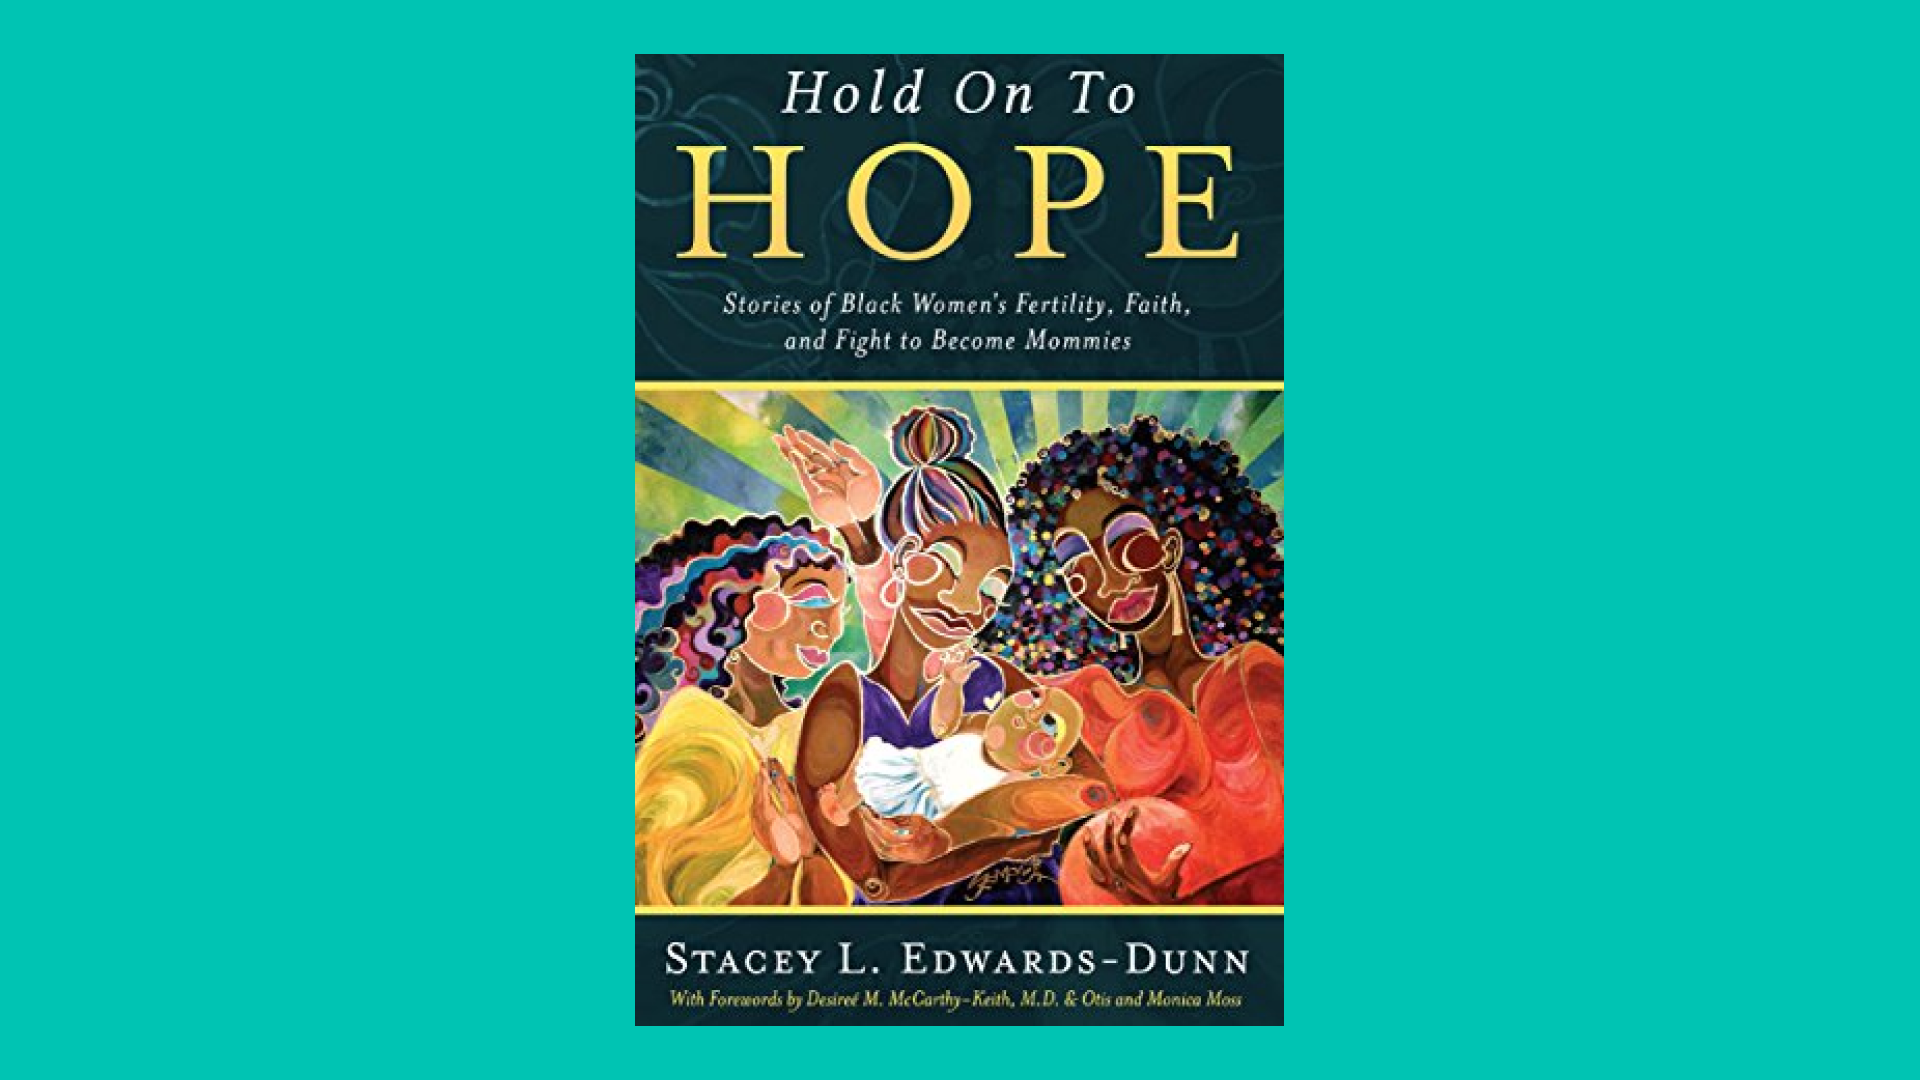 “Hold Onto Hope: Stories of Black Women’s Fertility, Faith, and Fight to Become Mommies” by Stacey L. Edwards-Dunn